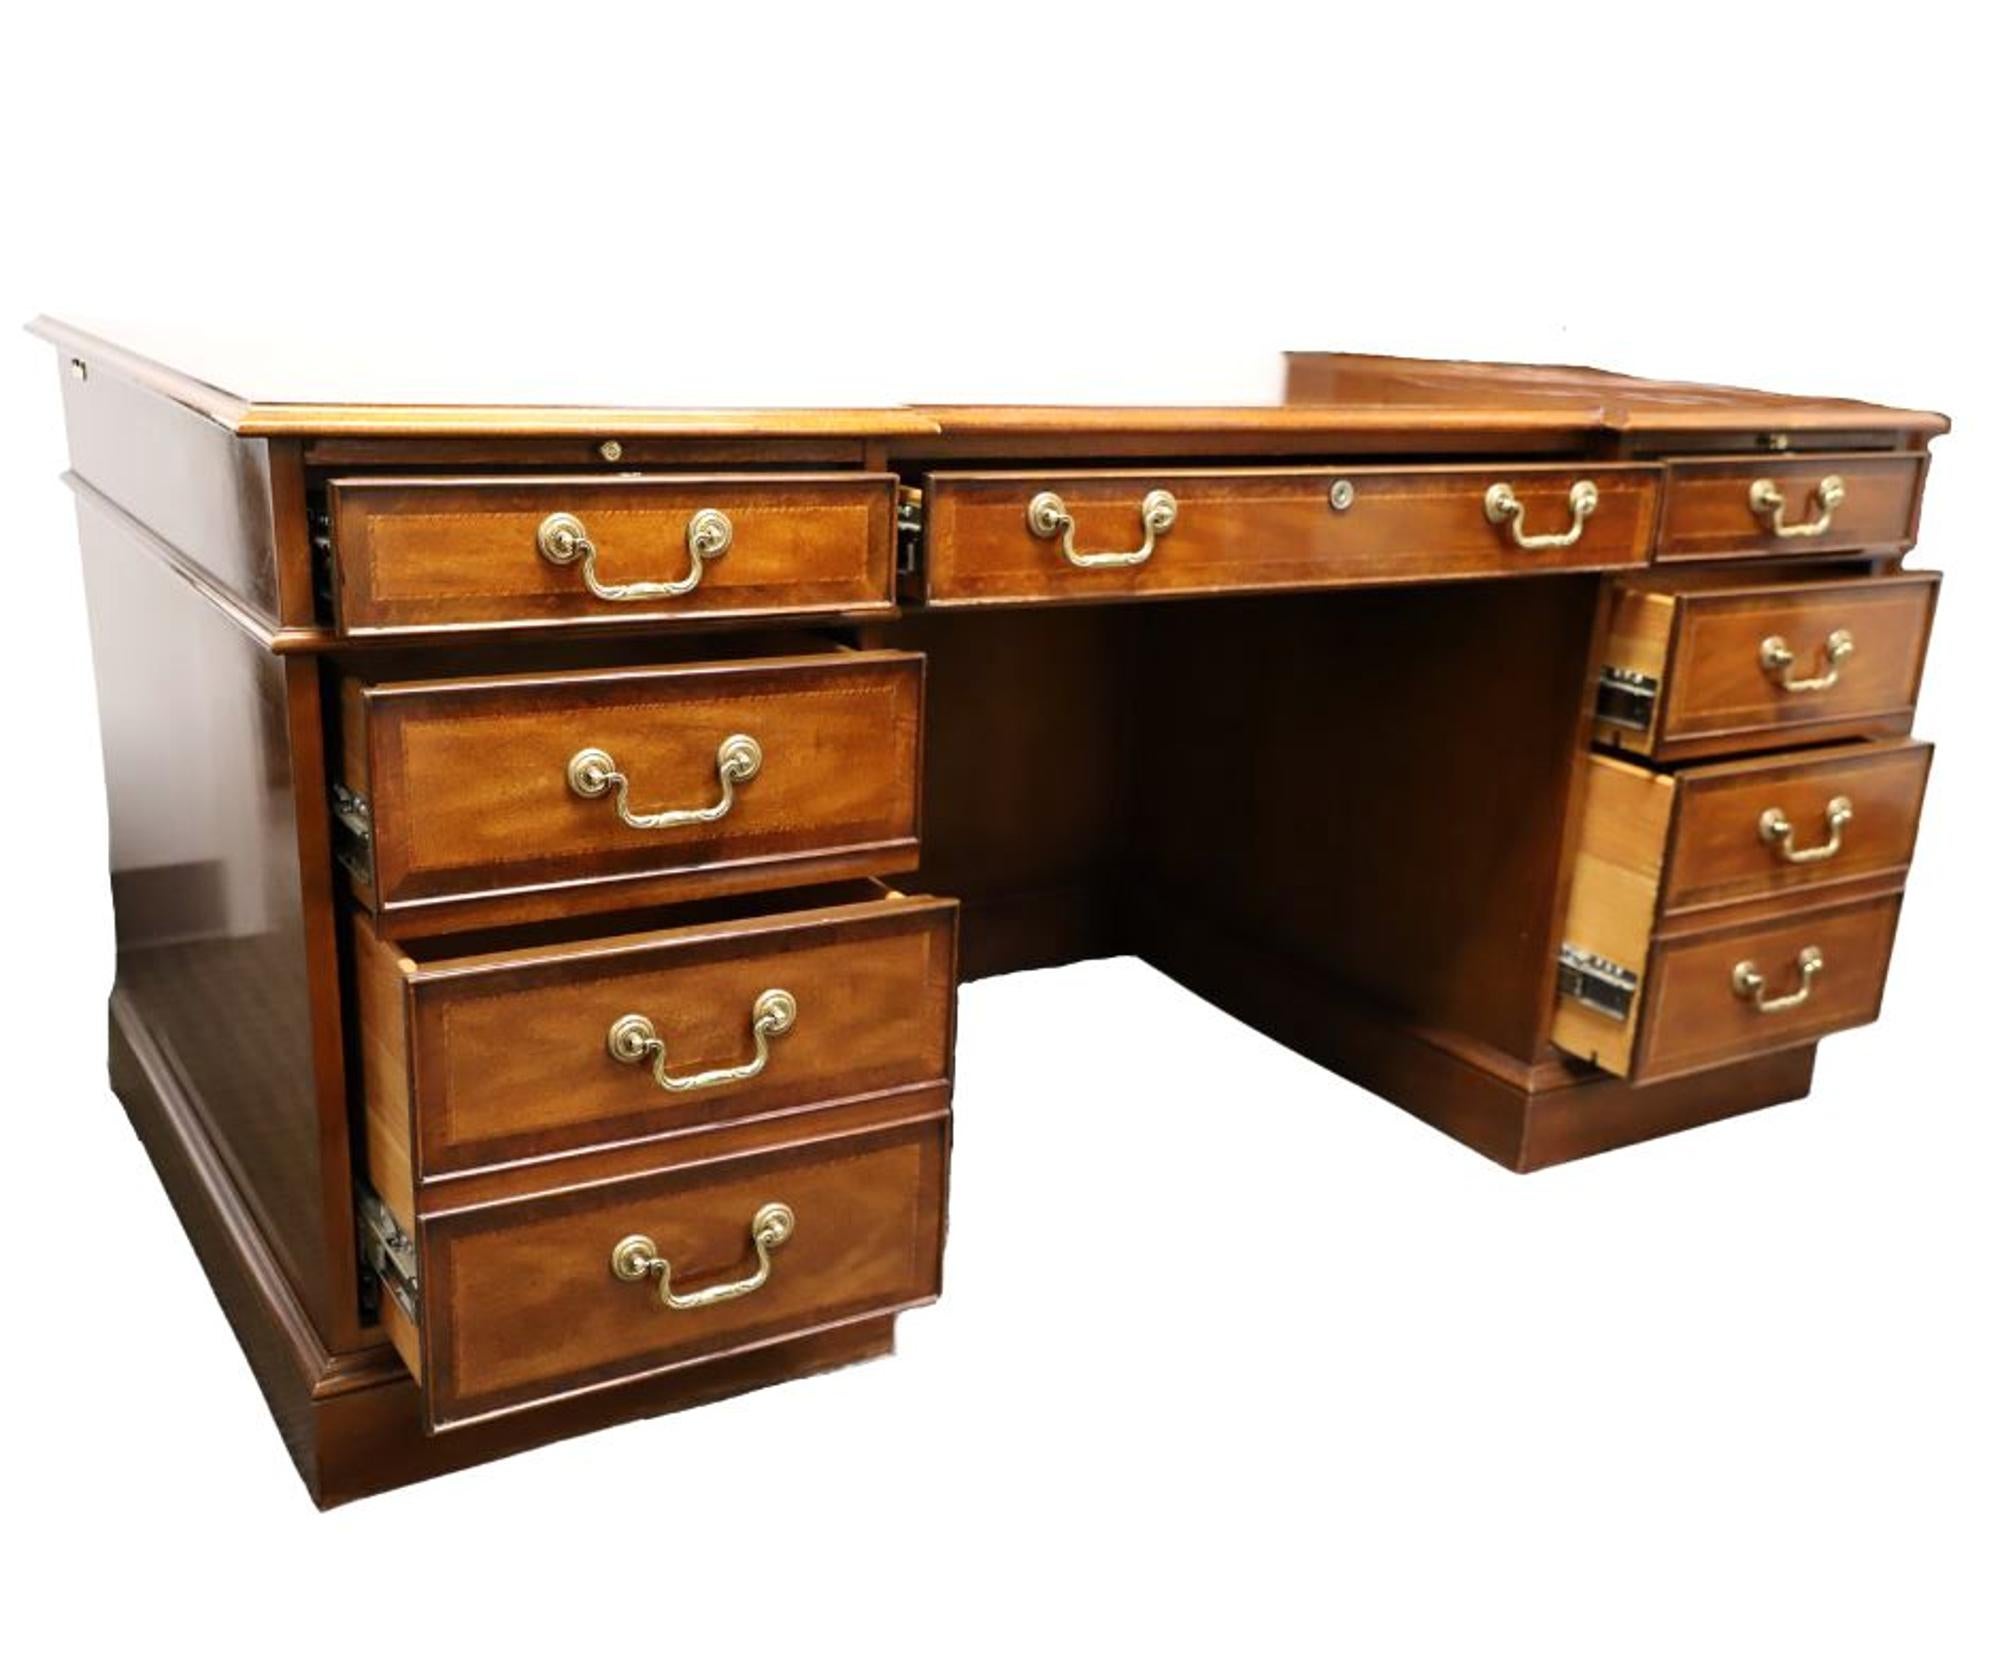 20th Century COUNCILL Banded Burl Walnut Traditional Executive Desk